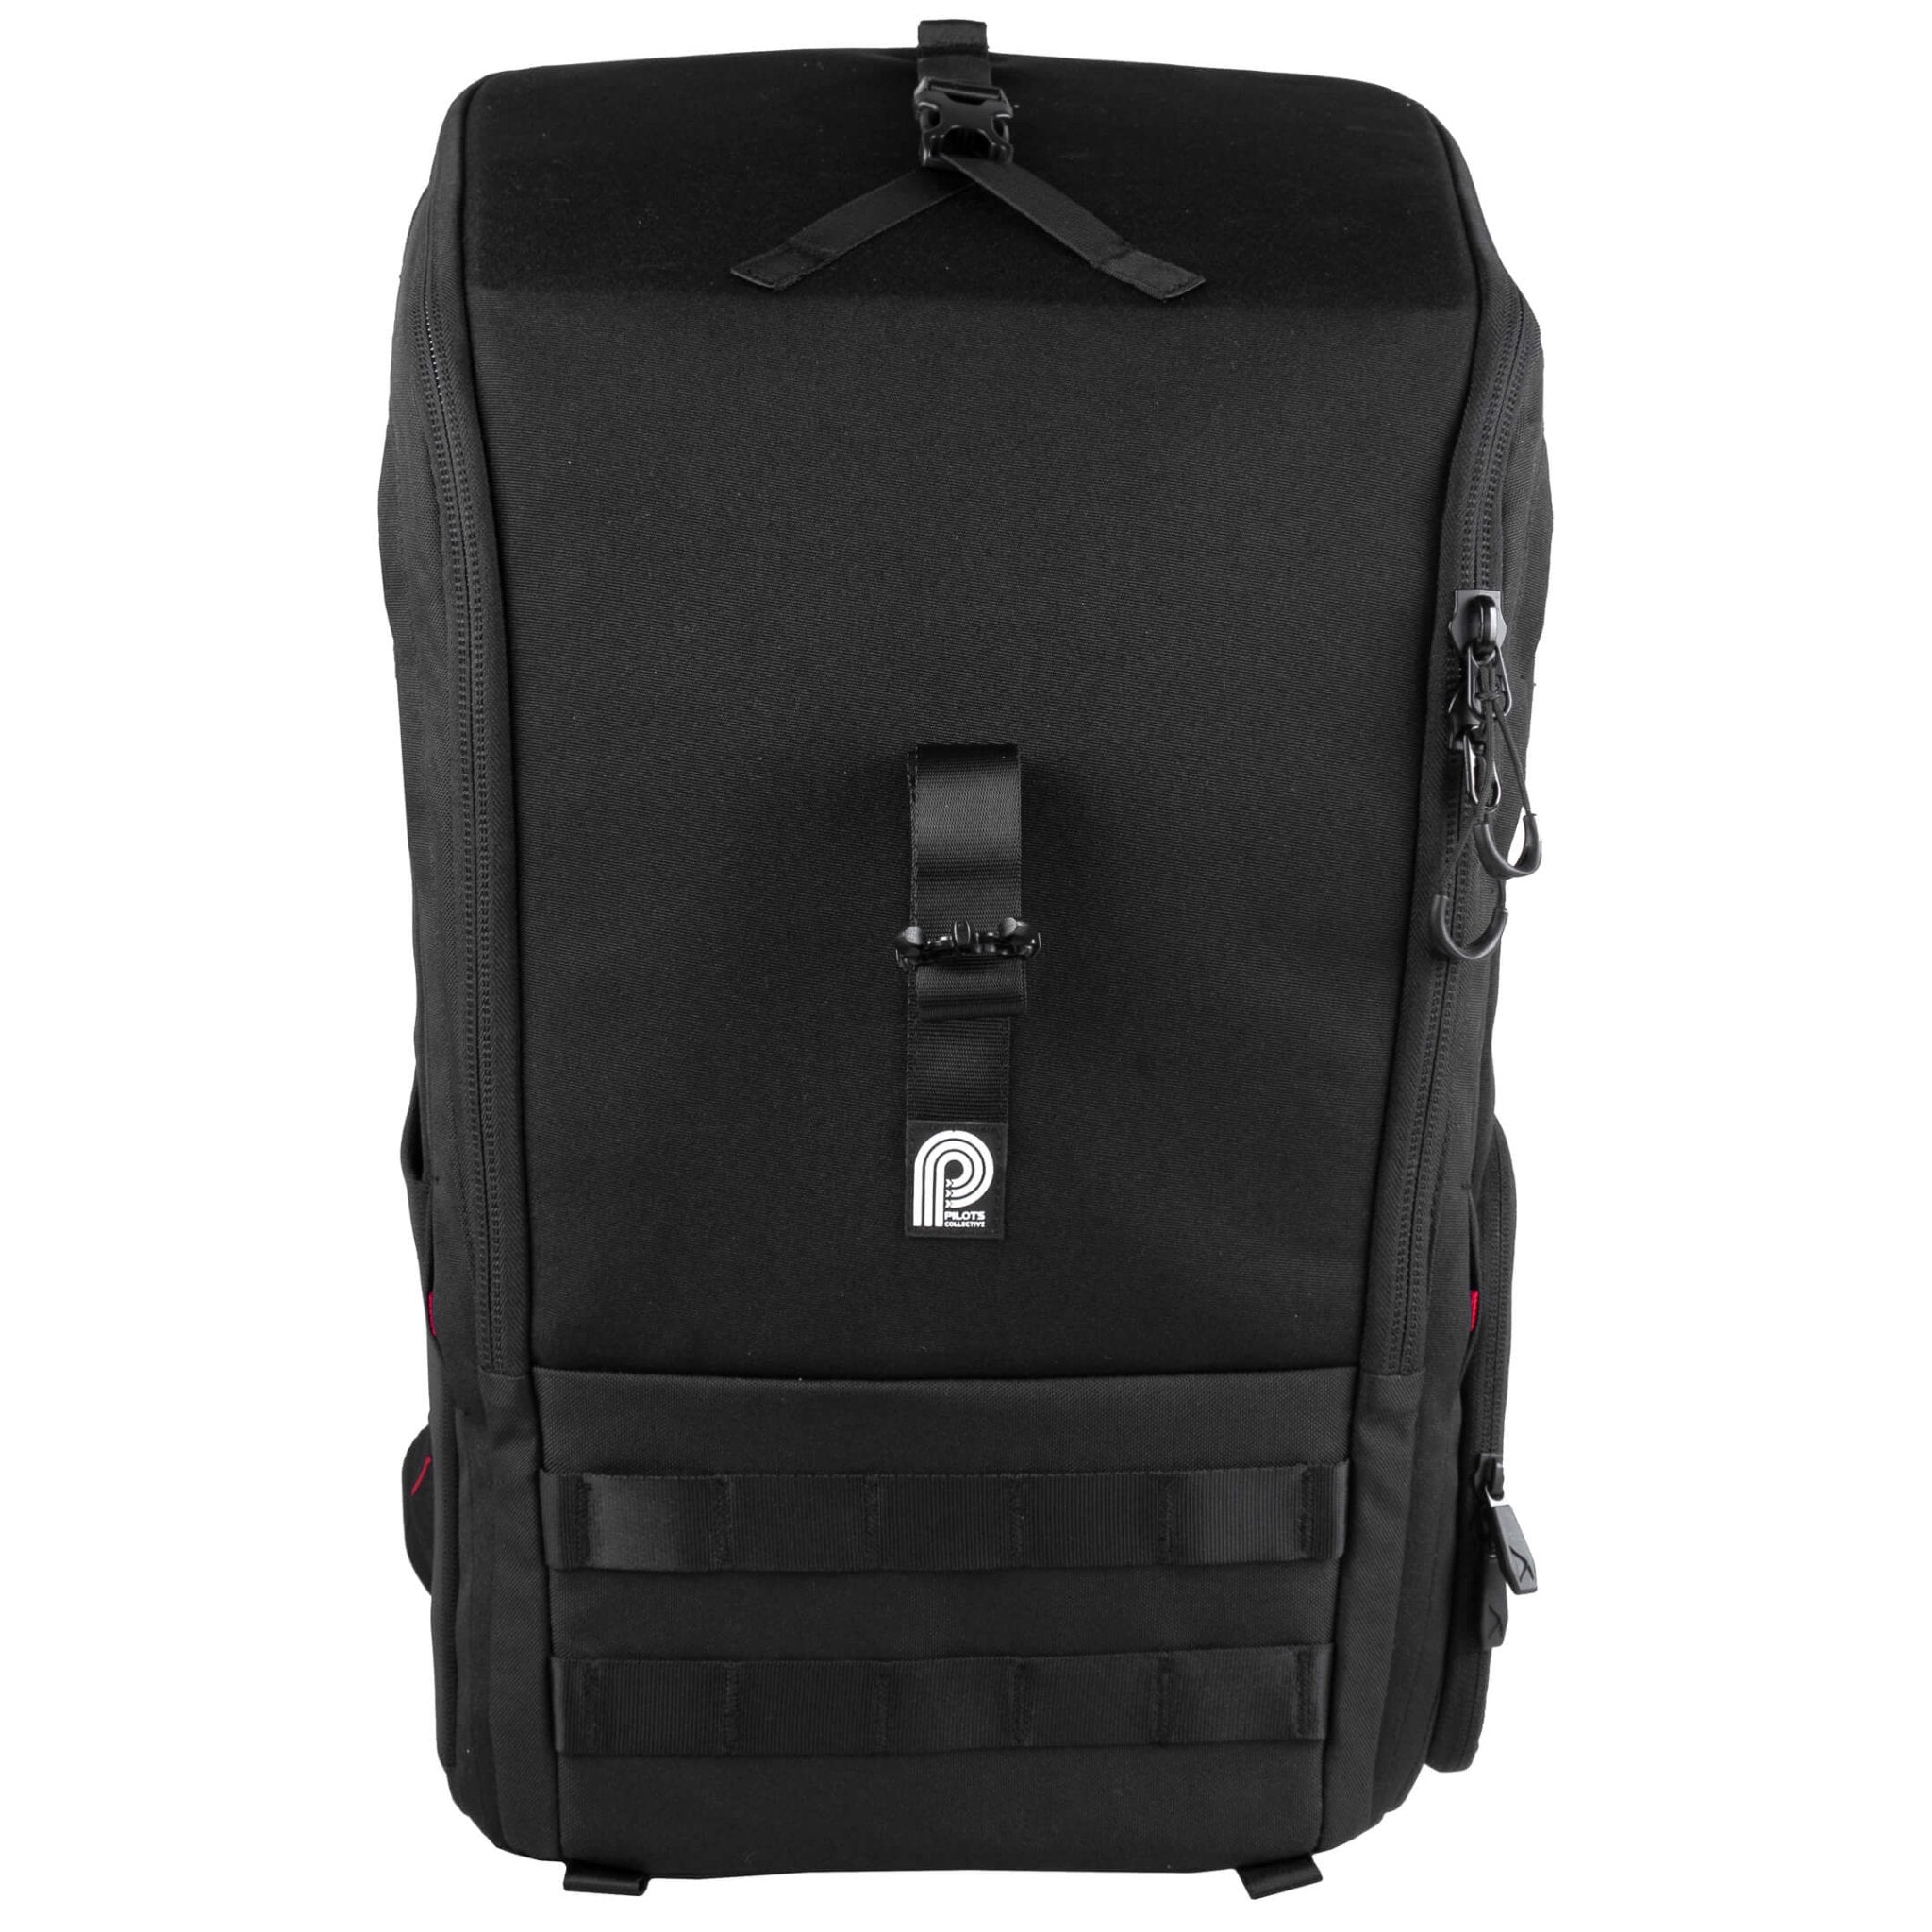 Torvol Urban Carrier Backpack - Your All-Round Freestyle Backpack 4 - Torvol - Drone Authority